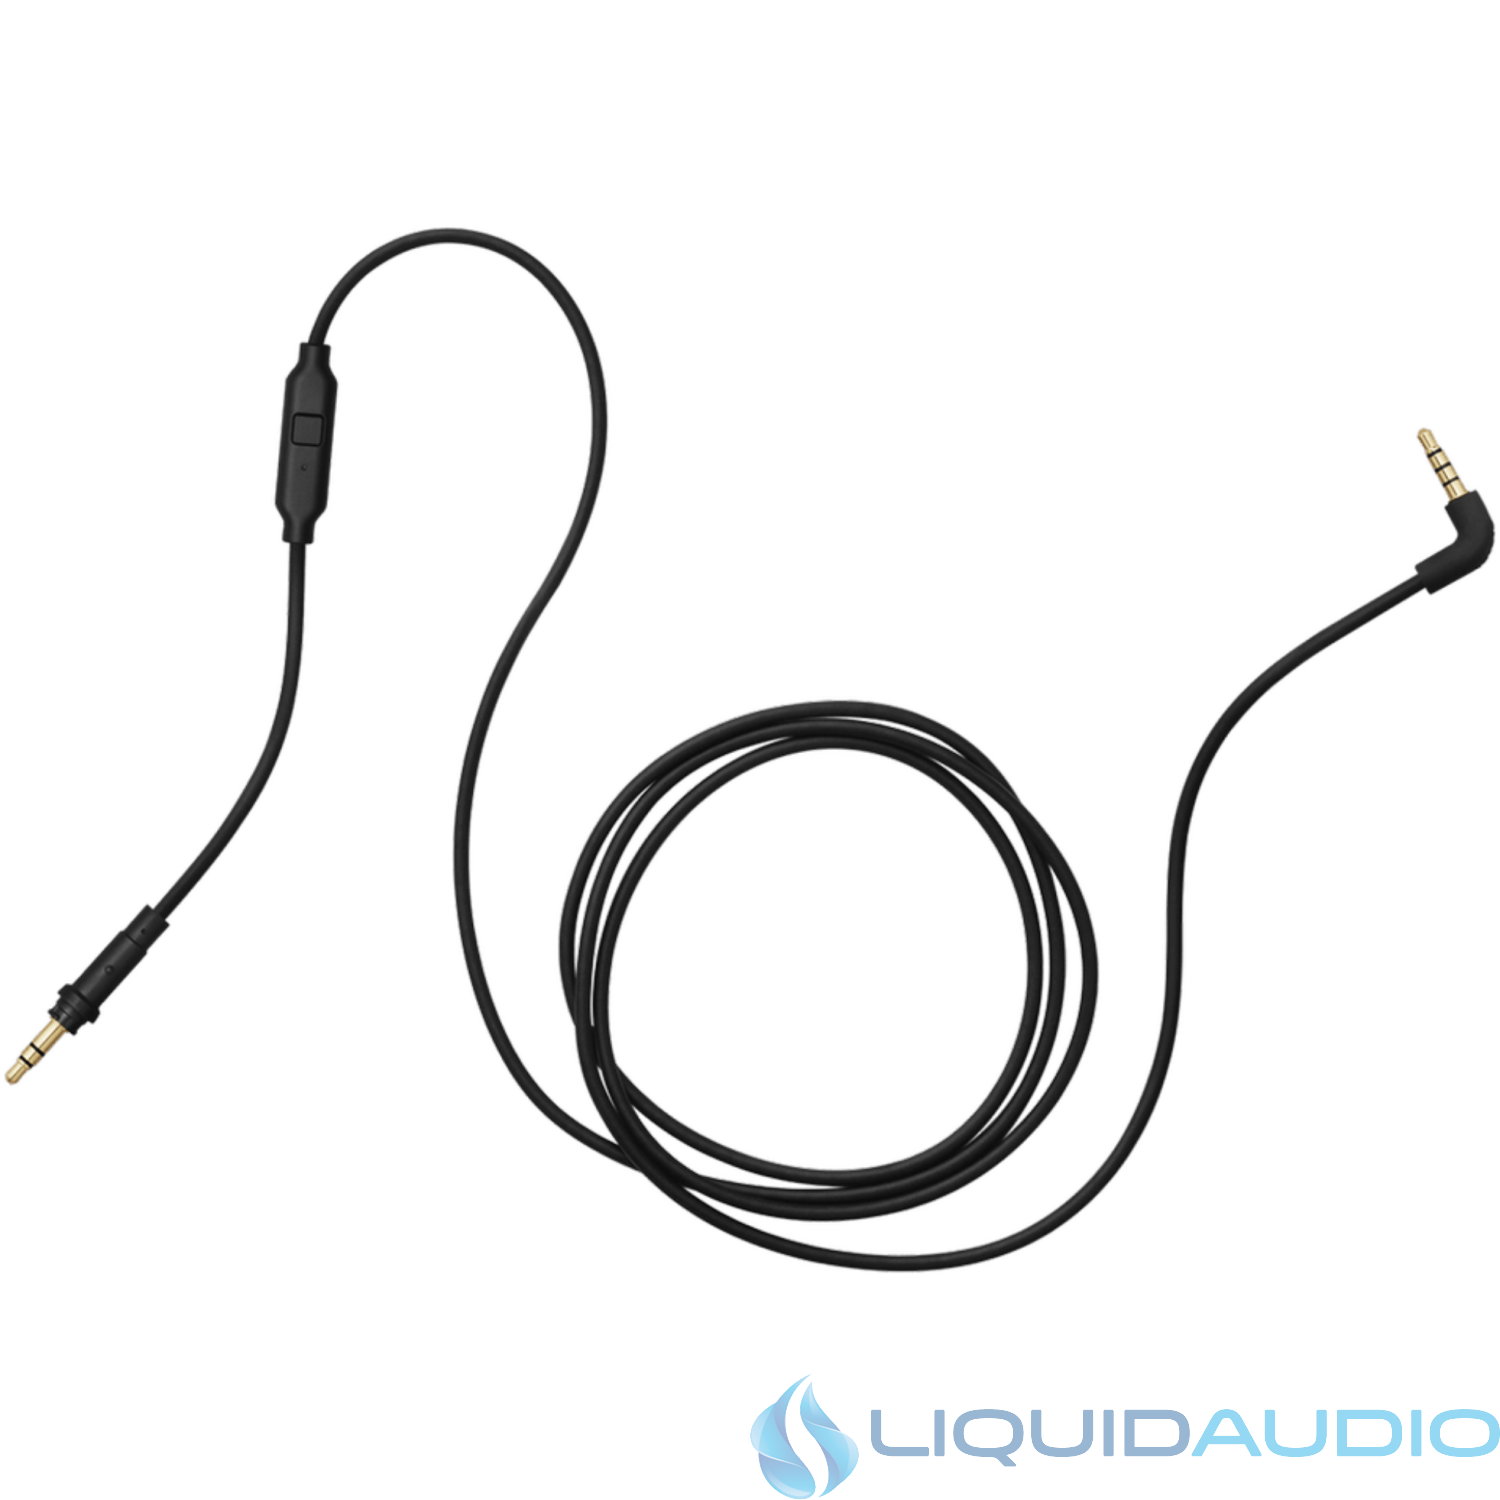 AIAIAI C01 Straight Headphone Cable with 1 Button Mic, 4 Feet